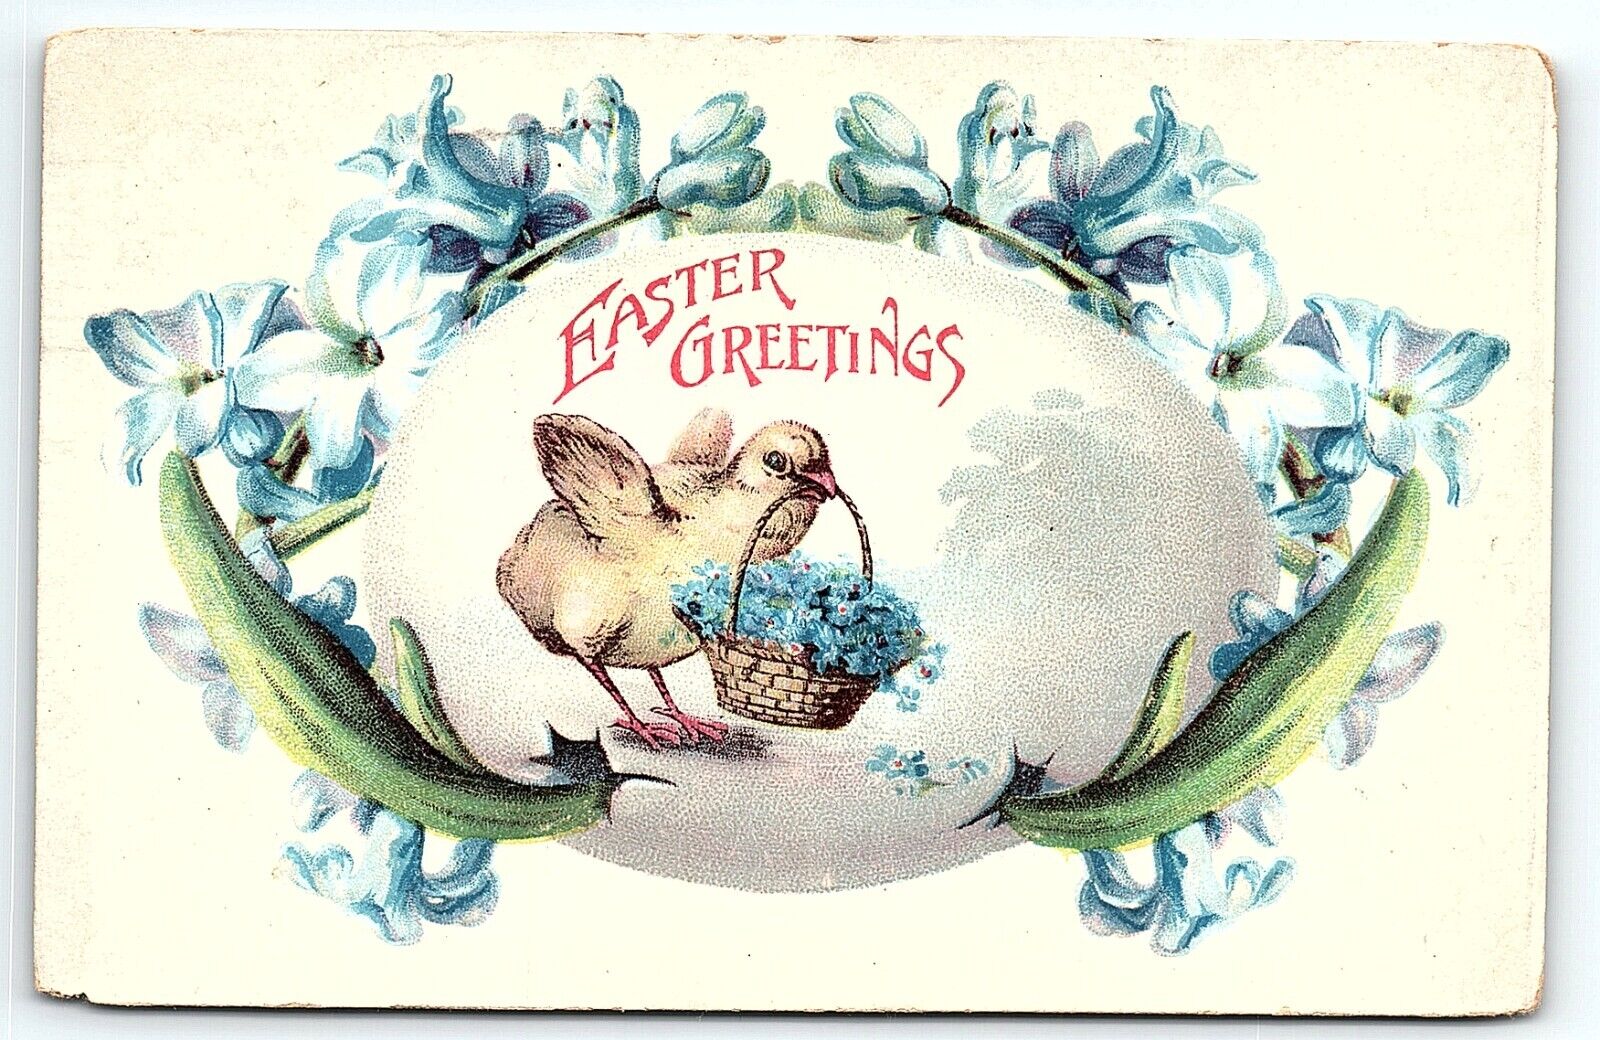 1908 EASTER GREETINGS BABY CHICK BASKET OF FLOWERS SPARTA WI POSTCARD P3311